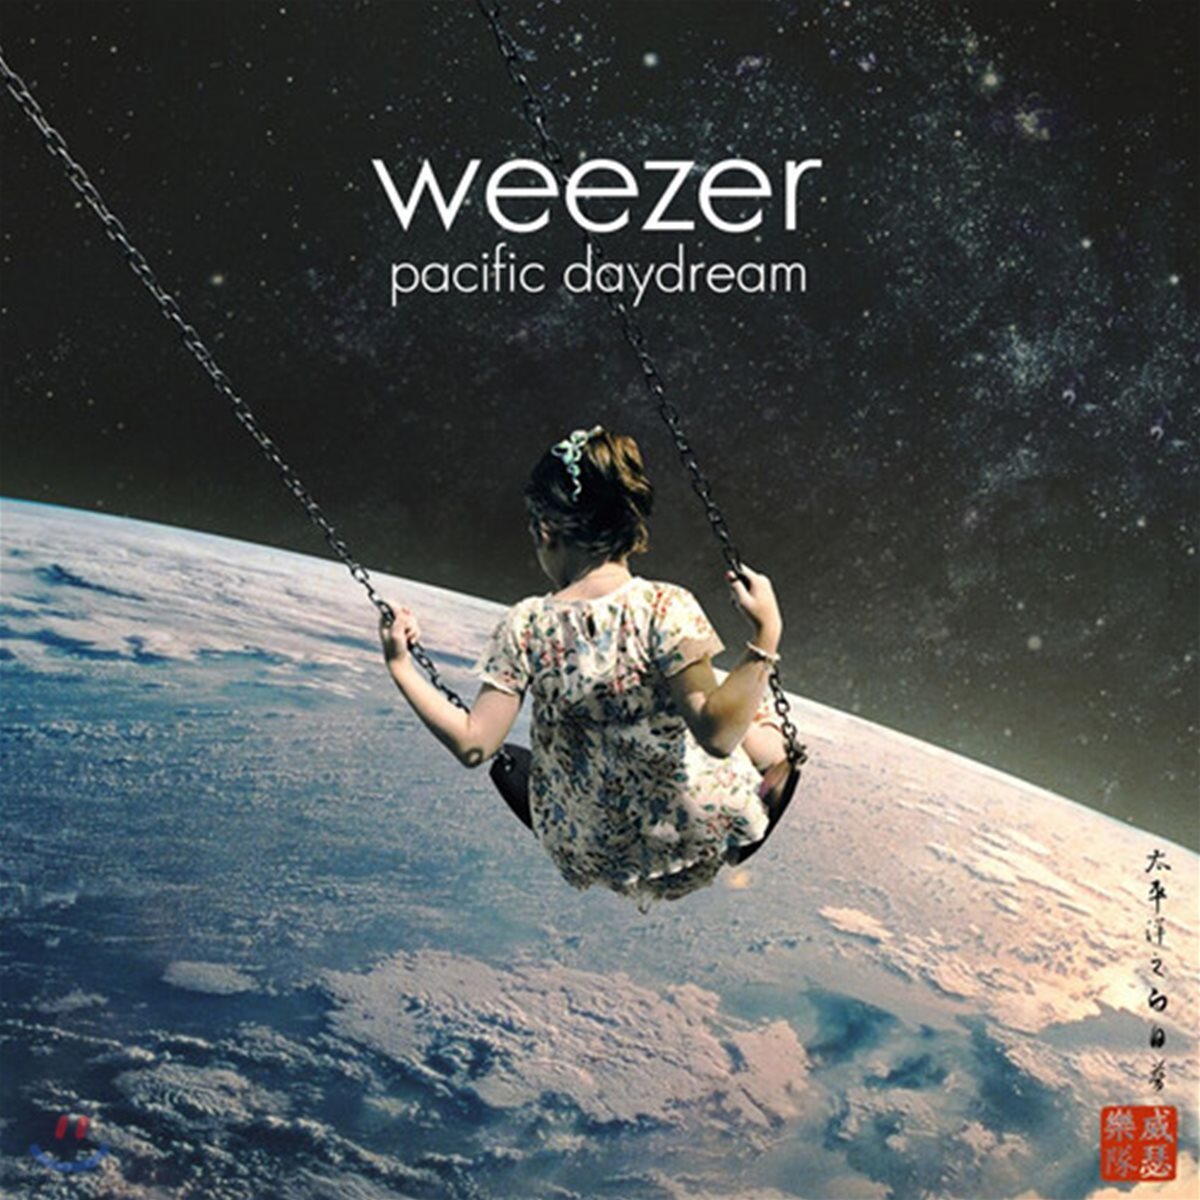 Weezer (위저) - Pacific Daydream